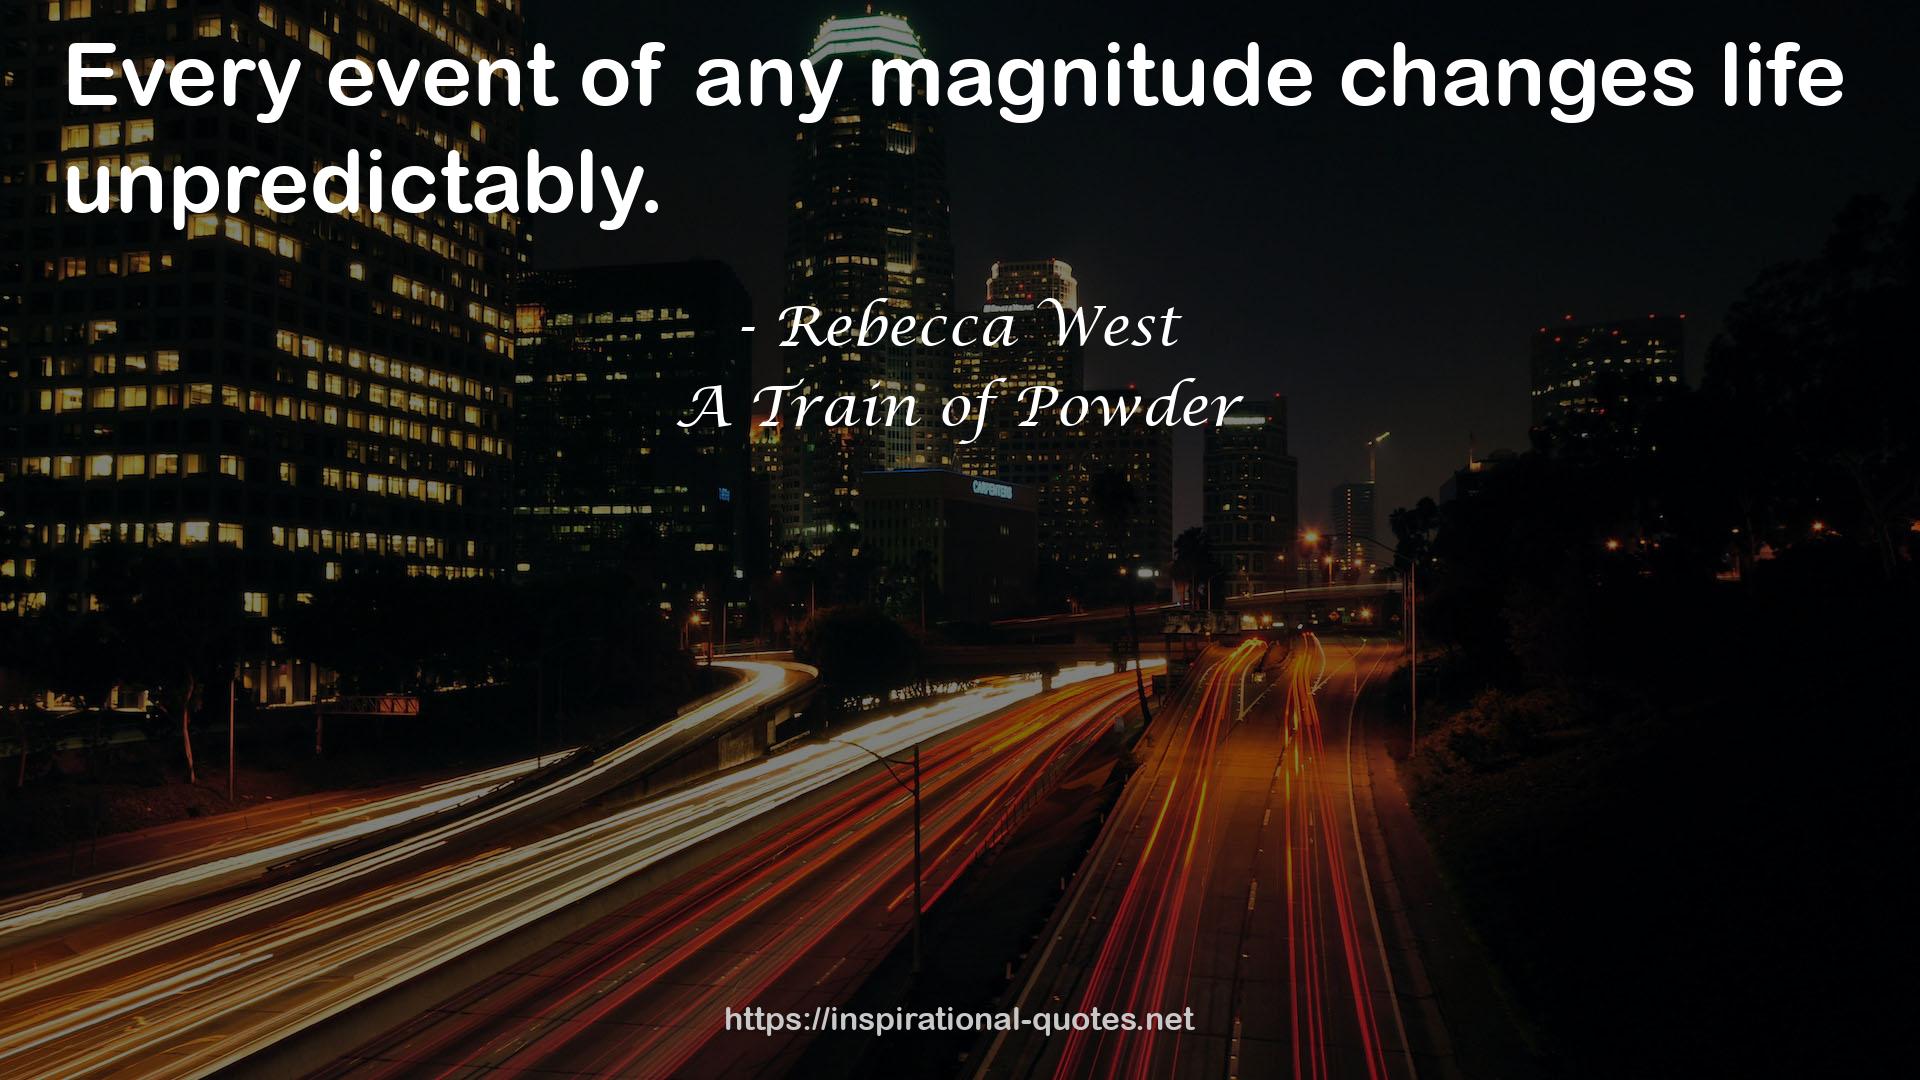 A Train of Powder QUOTES